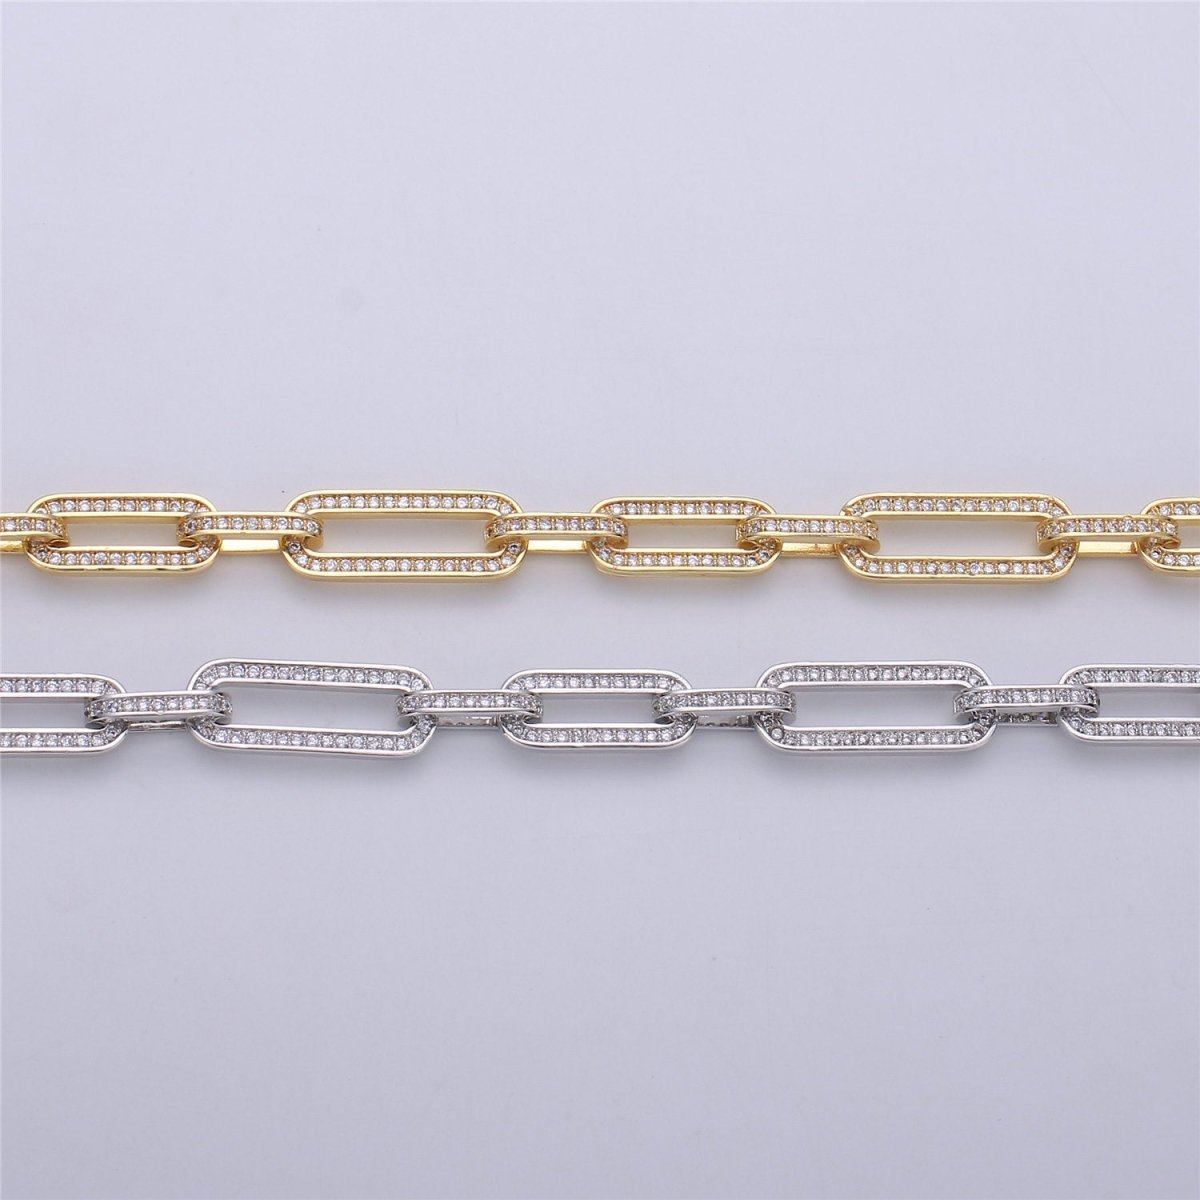 Micro Pave Chain 24K Gold Filled PAPER CLIP Chain, Thick Elongated Chain by Meter for Statement Necklace Making Supply, 8X20mm 1mm Thickness , UNIQUE PAPERCLIP Chain | ROLL-080(O-055),ROLL-081(O-056) Clearance Pricing - DLUXCA